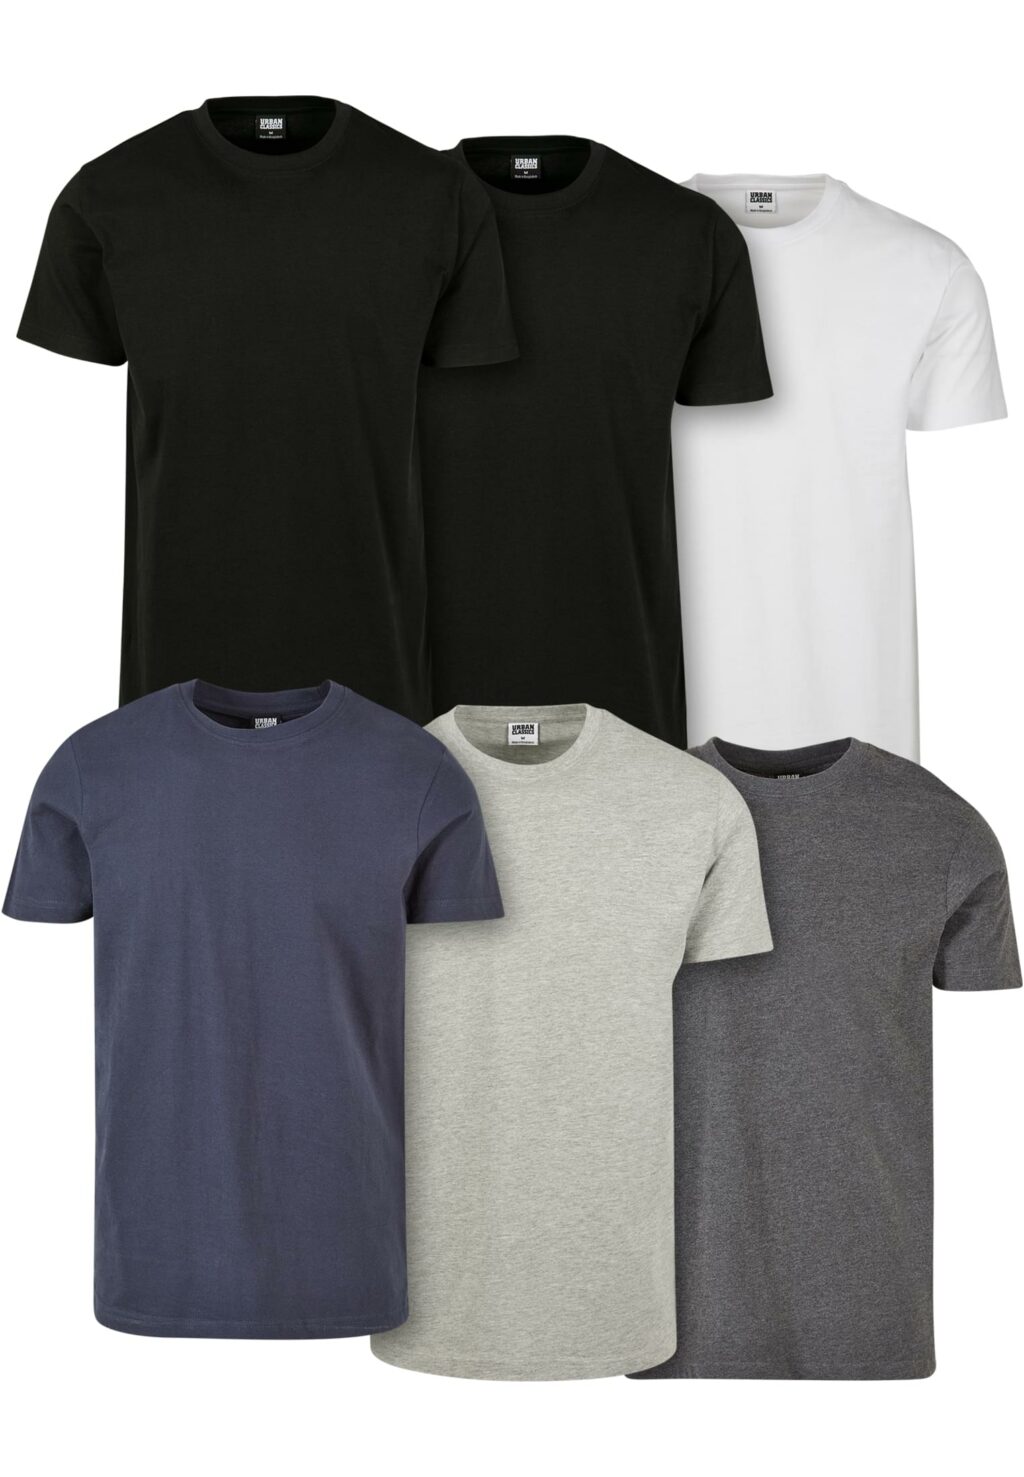 Urban Classics Basic Tee 6-Pack blk/blk/wht/nvy/hthrgry/chrcl TB2684C